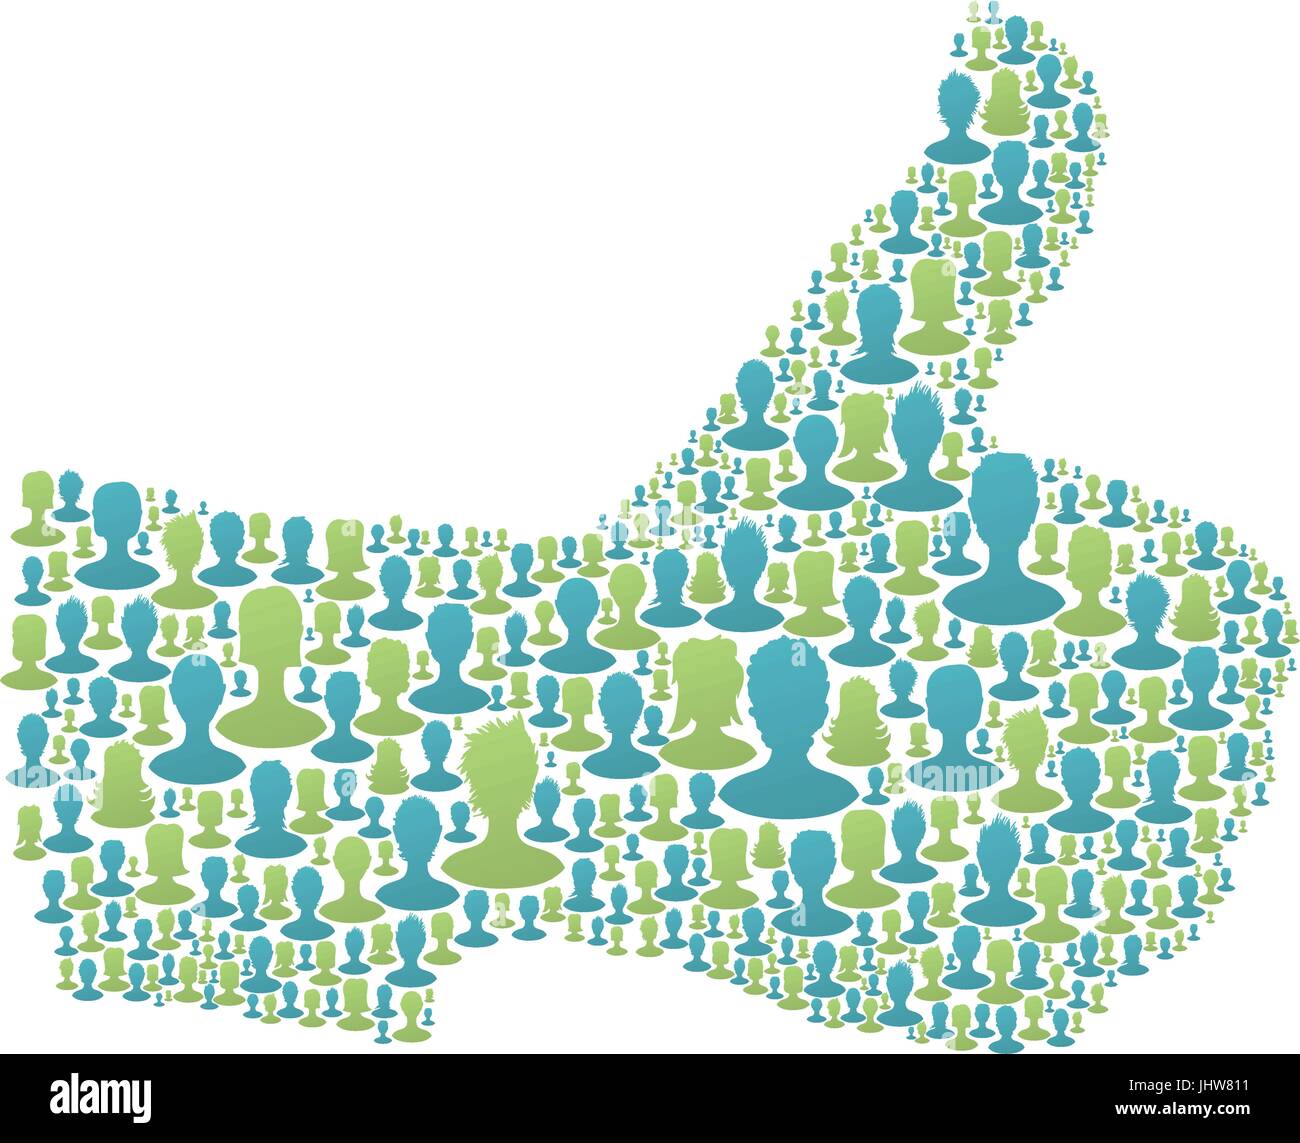 Thumb up symbol. composed from many people silhouettes. Vector illustration, EPS10 Stock Vector